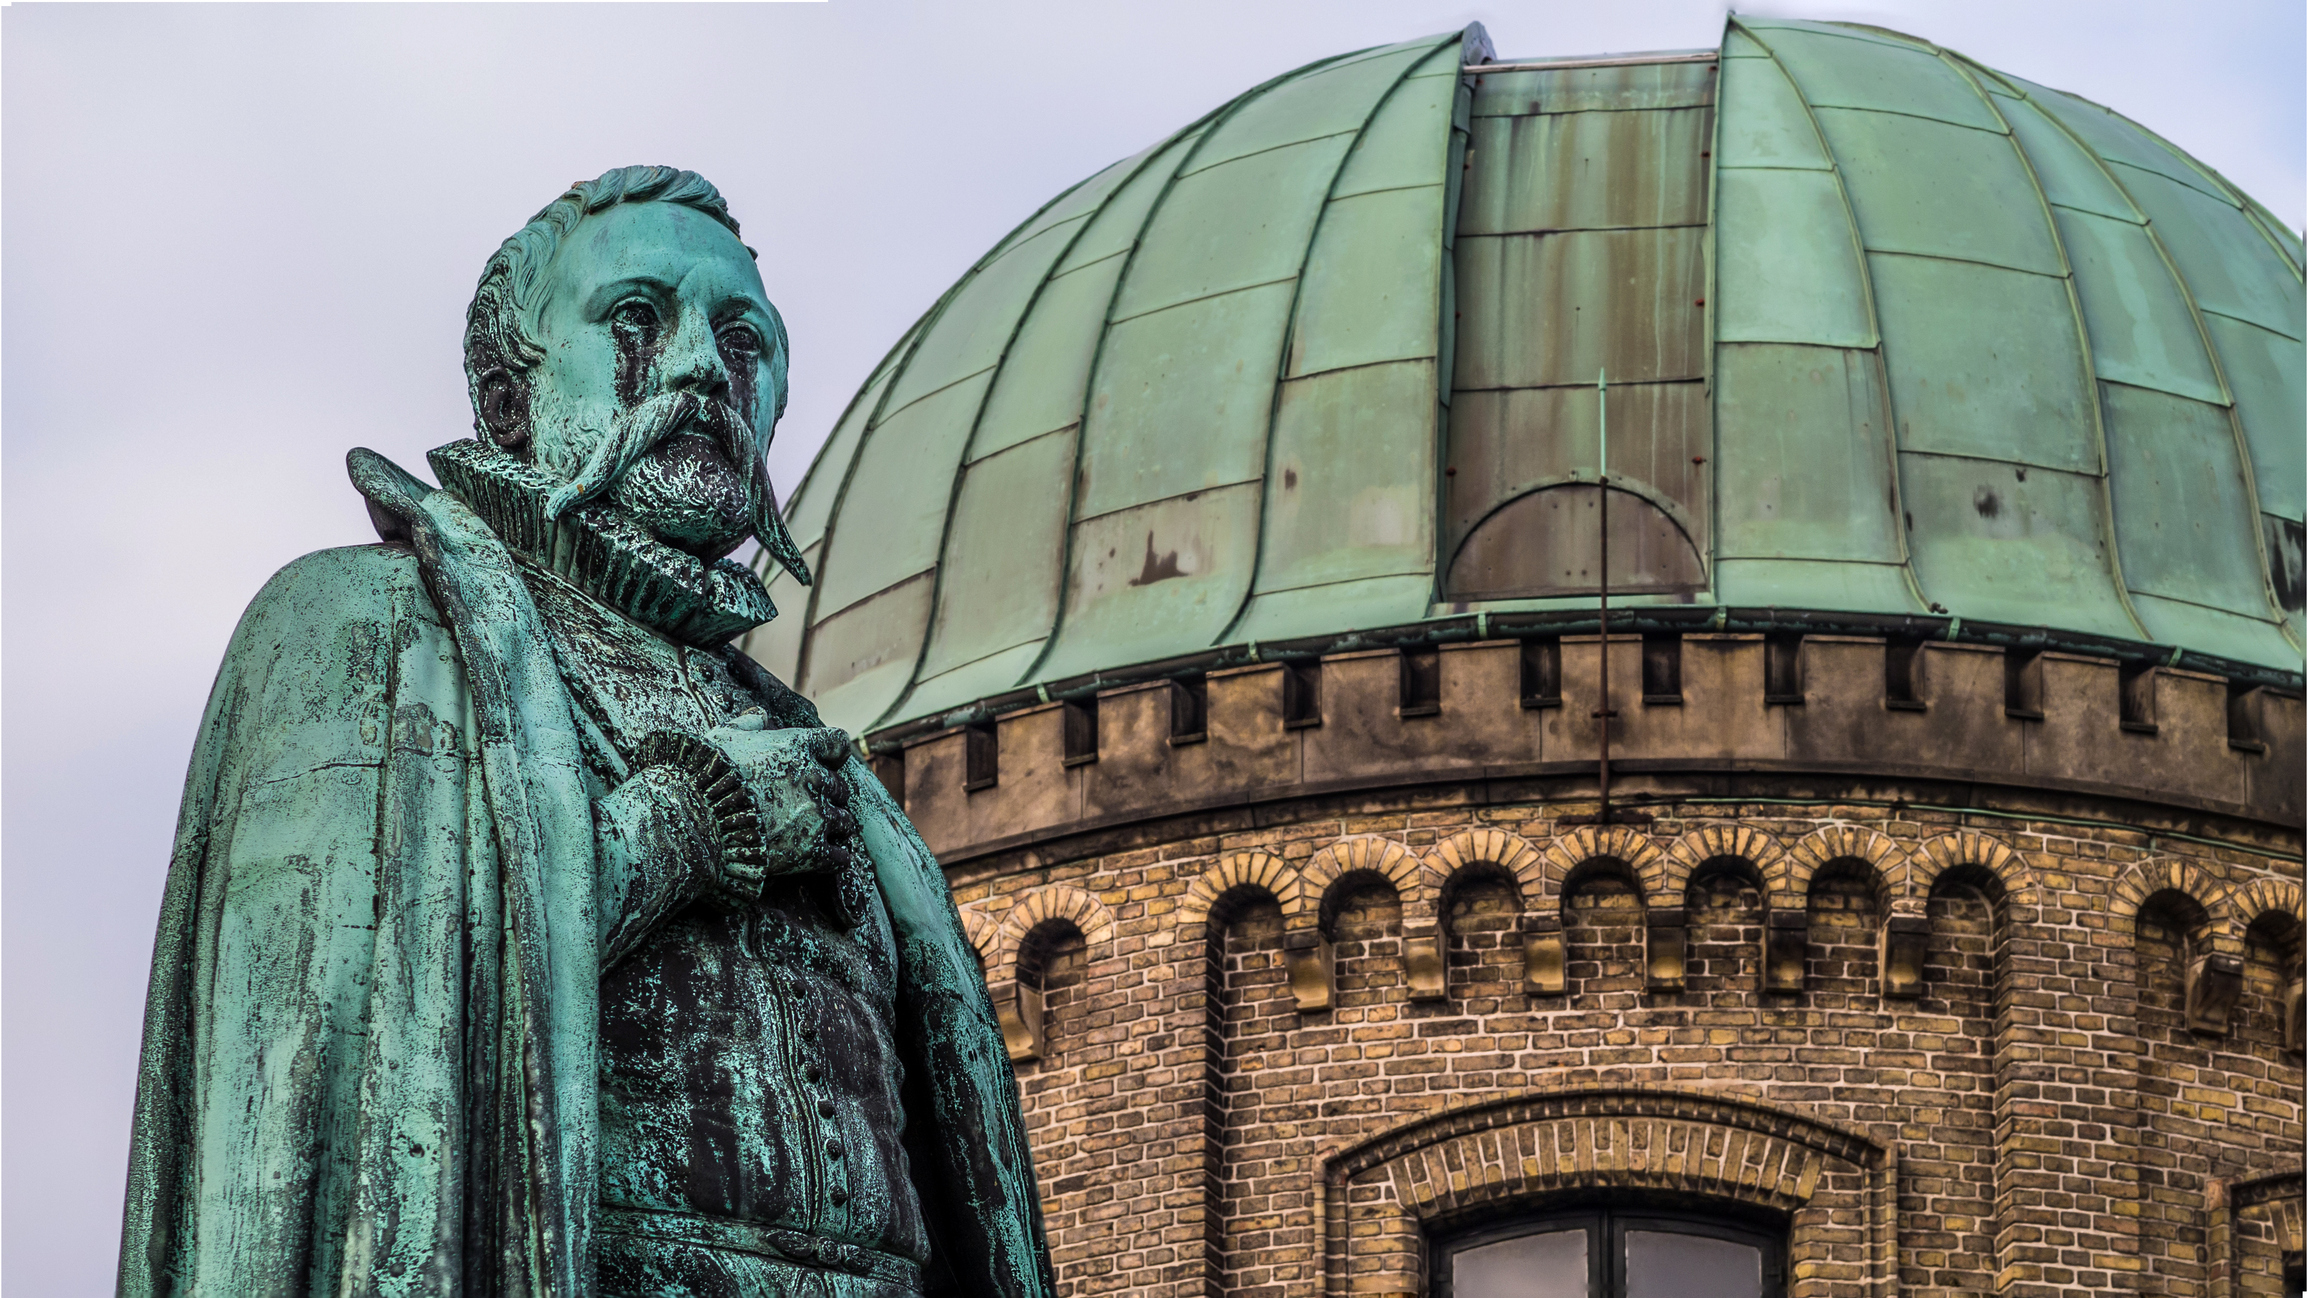 Statue of Tycho Brahe in front of a green copper roofed observatory next to Rosenborg castle in Copenhagen, Denmark.